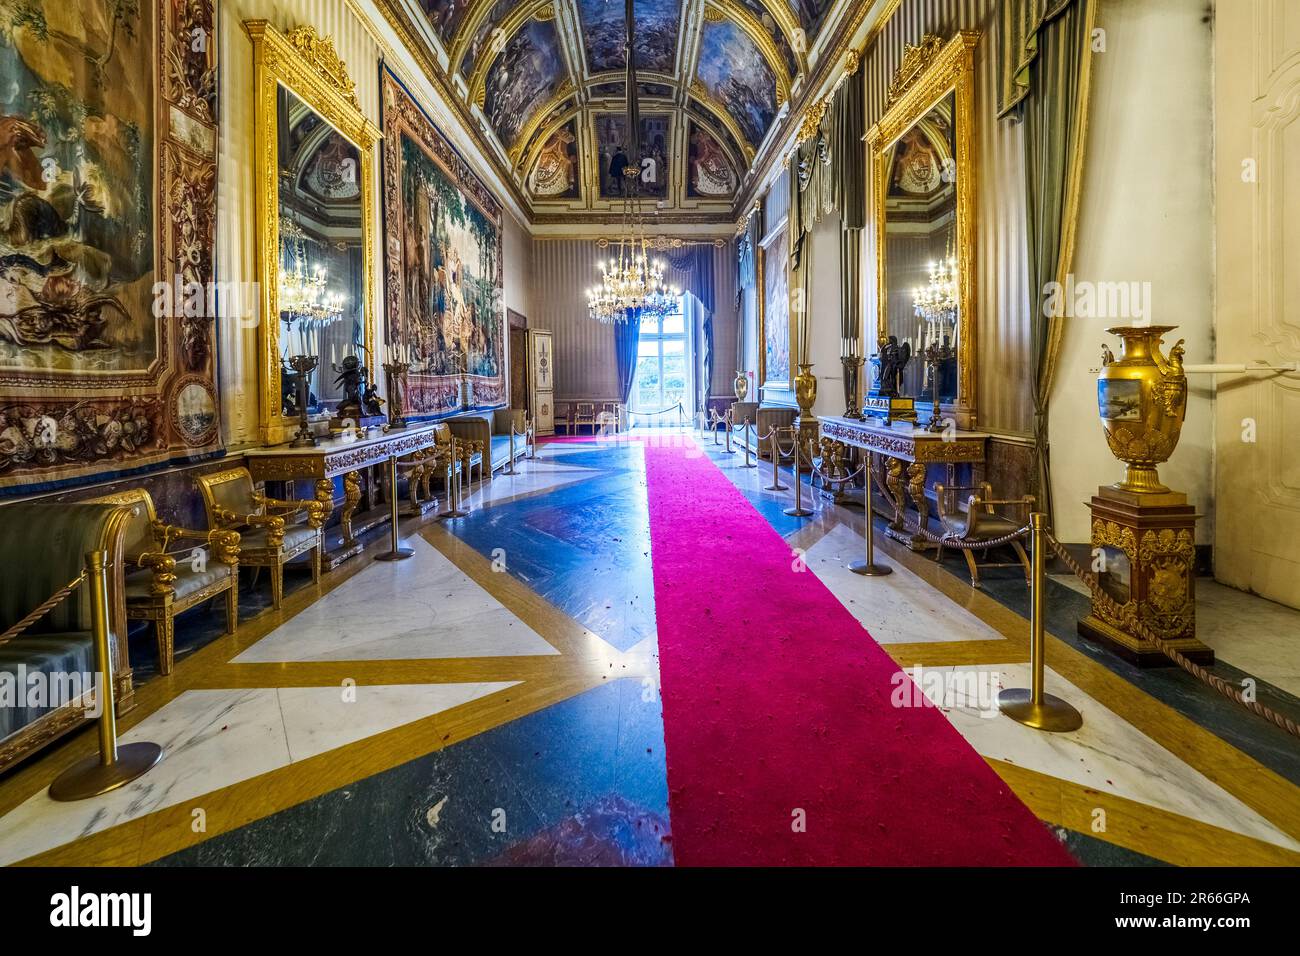 Ambassador's Hall in the Royal Palace of Naples that In 1734 became the royal residence of the Bourbons - Naples, Italy Stock Photo